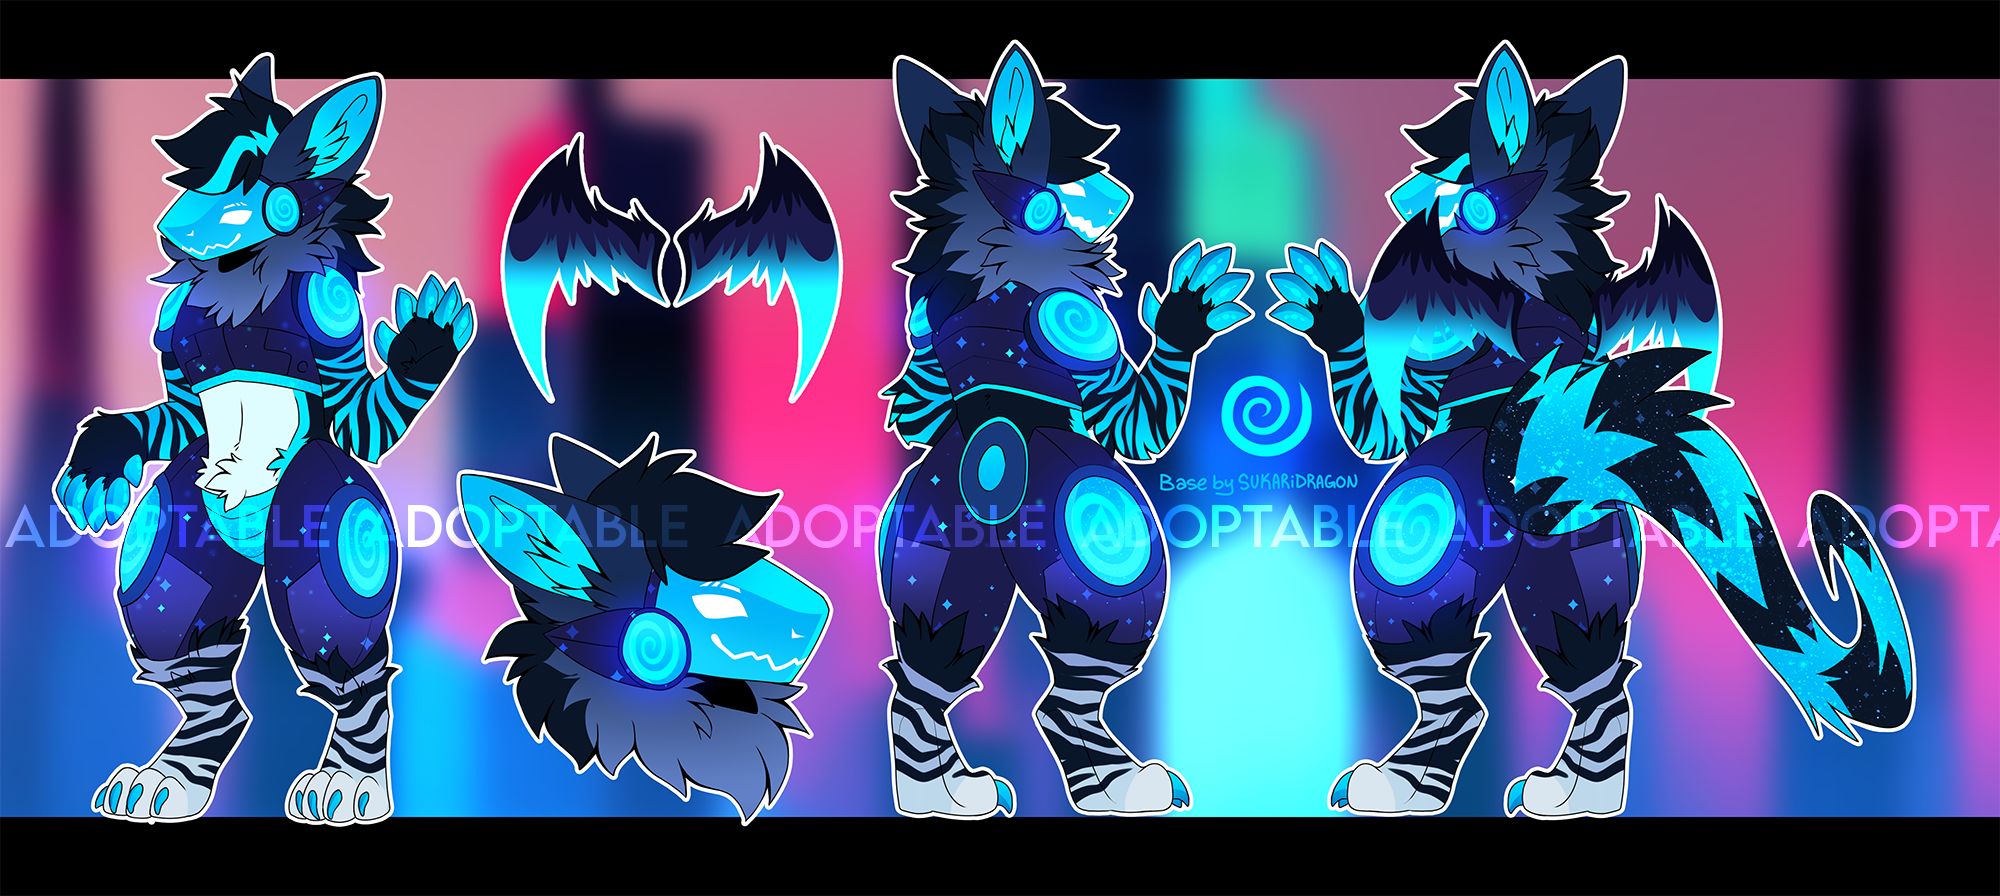 I have made myself a glow in the dark protogen player model for